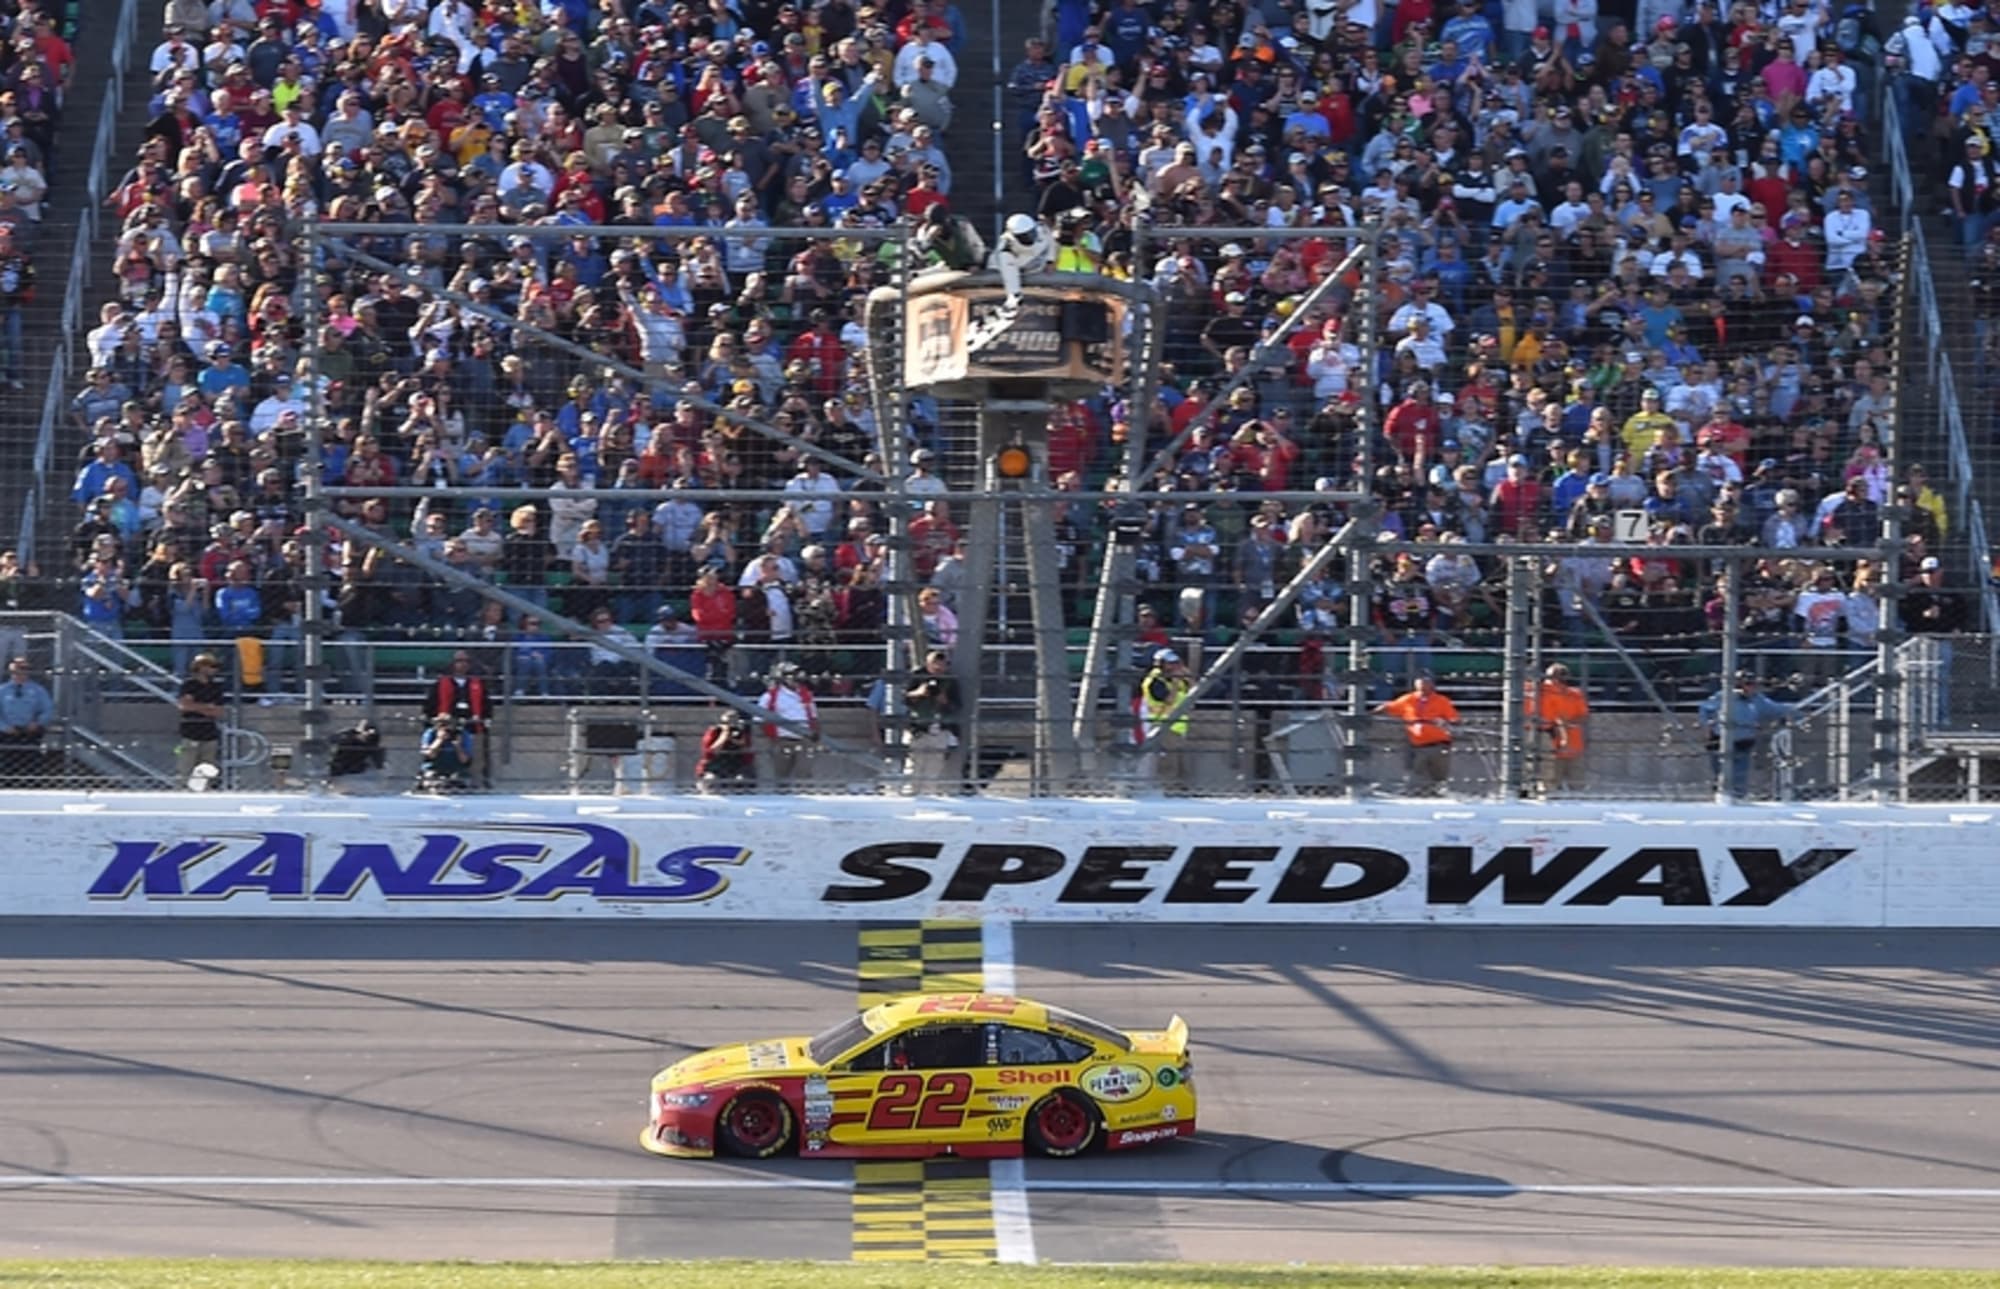 NASCAR Chase Standings: Update after Kansas